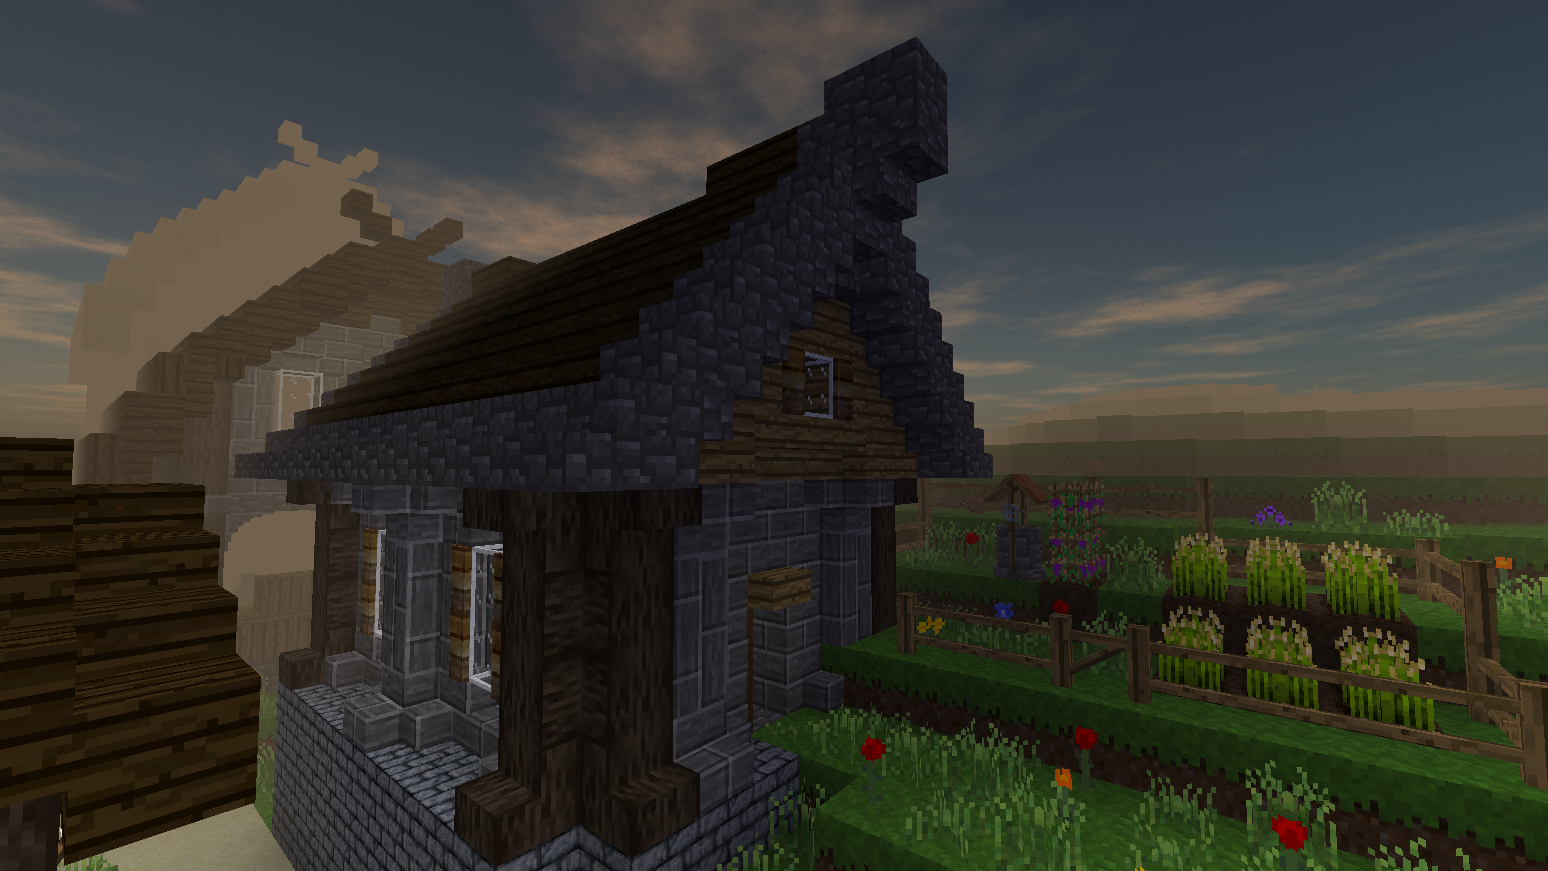 Easy to build, aesthetic medieval style house by jakab. (Everything you can see on the screenshot is accessible in survival mode)